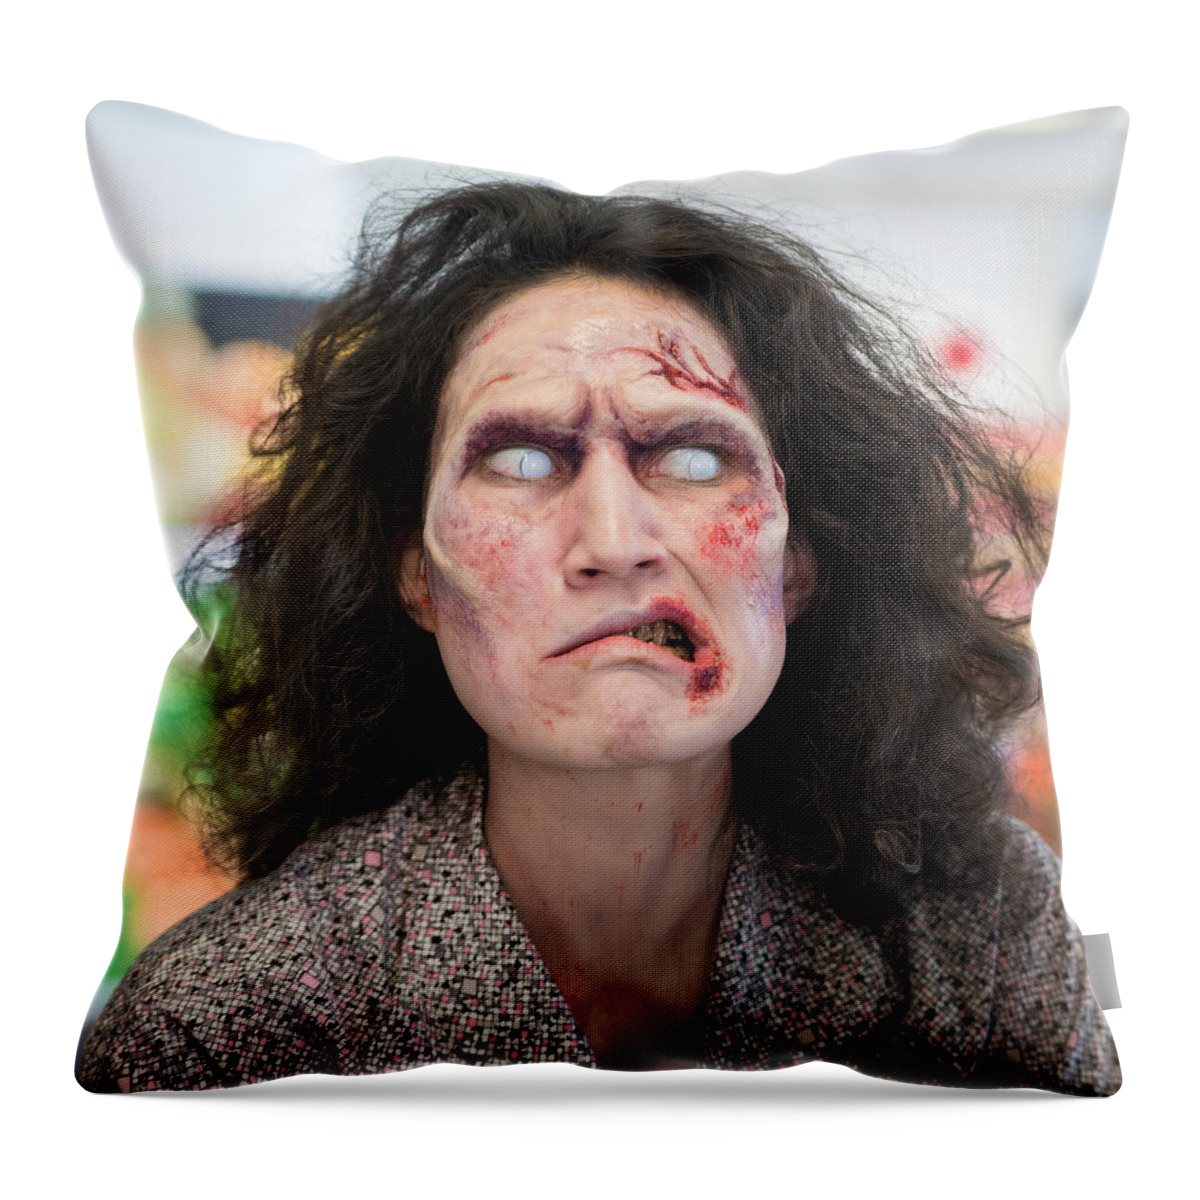 Zombie Throw Pillow featuring the photograph Funny zombie grimace by Matthias Hauser